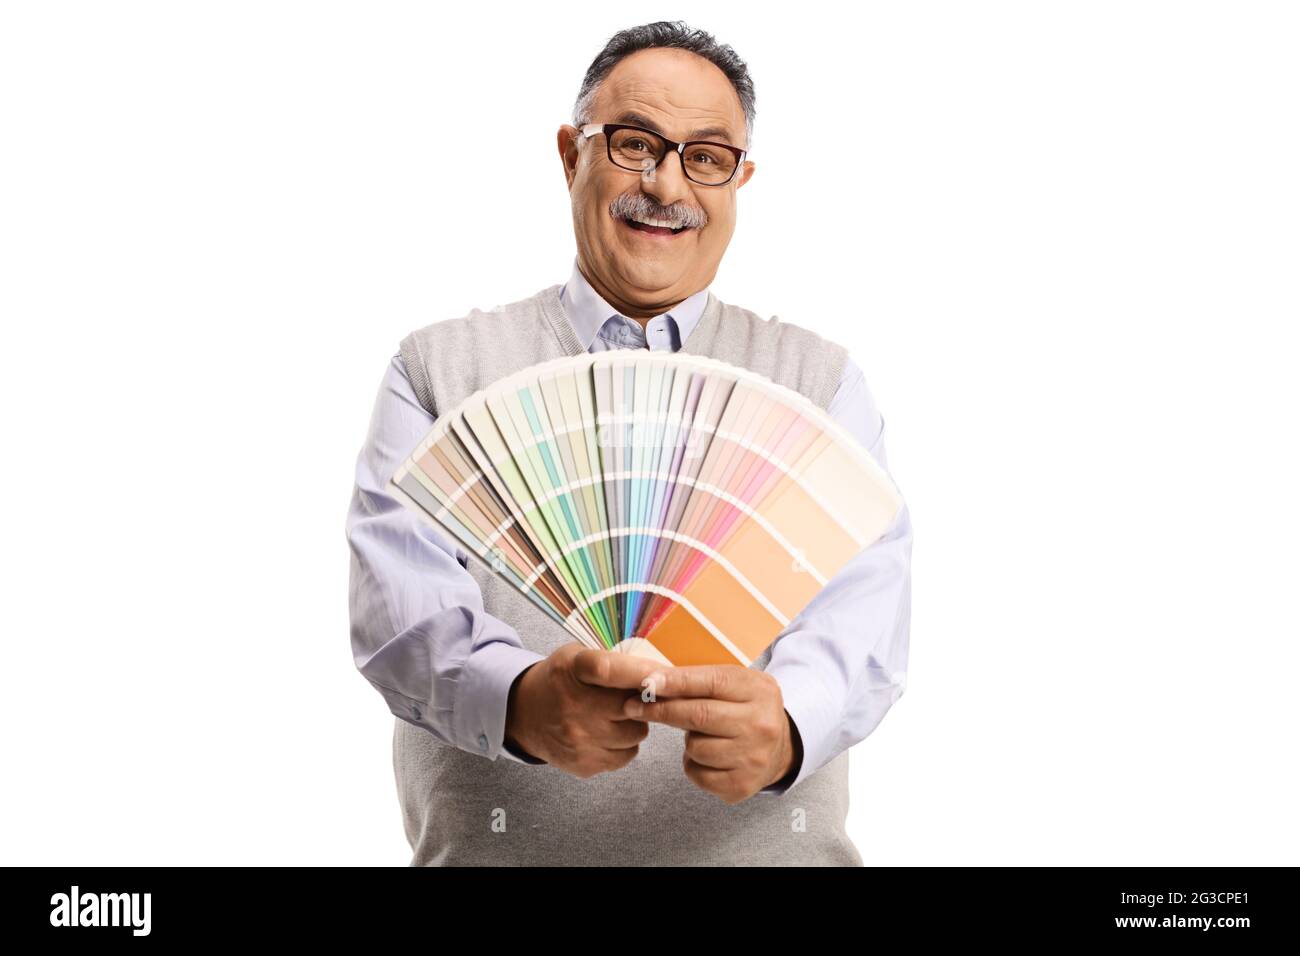 Mature man holding a color palette and looking at the camera isolated on white background Stock Photo